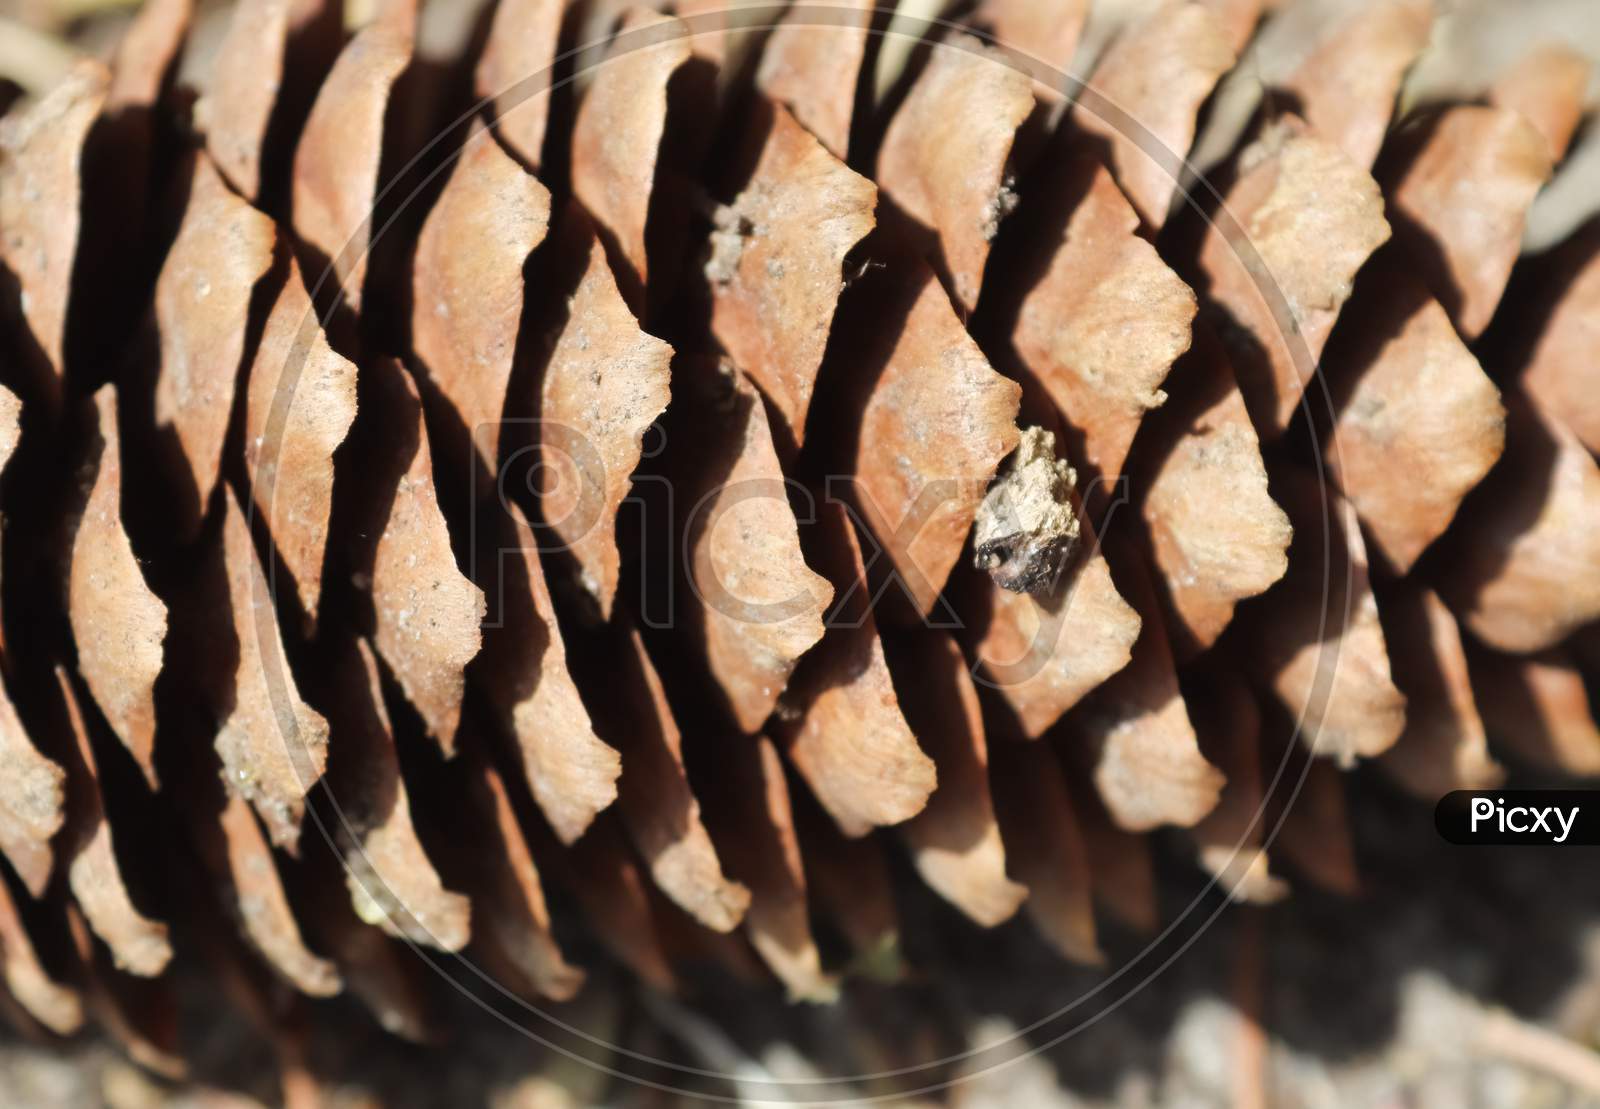 One Long Pine Cone Laying On The Ground With Brown Needles In A Forest